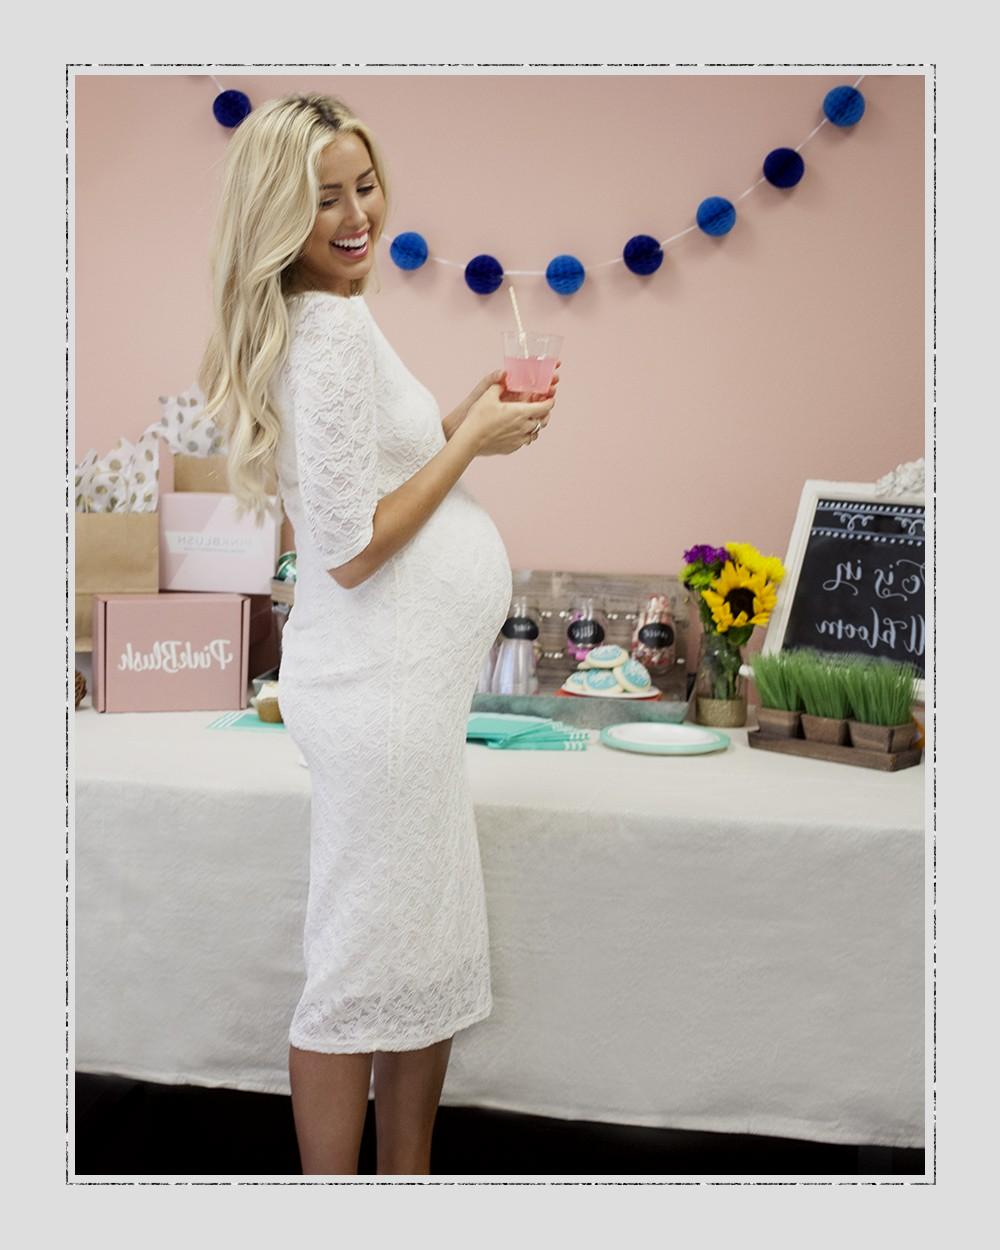 Full Size of Baby Shower:maternity Boutique Cute Maternity Dresses For Baby Shower Affordable Maternity Dresses For Baby Shower What To Wear To My Baby Shower Cute Baby Shower Outfits For Mom Maternity Maxi Dresses Maternity Dresses Maternity Gown Style